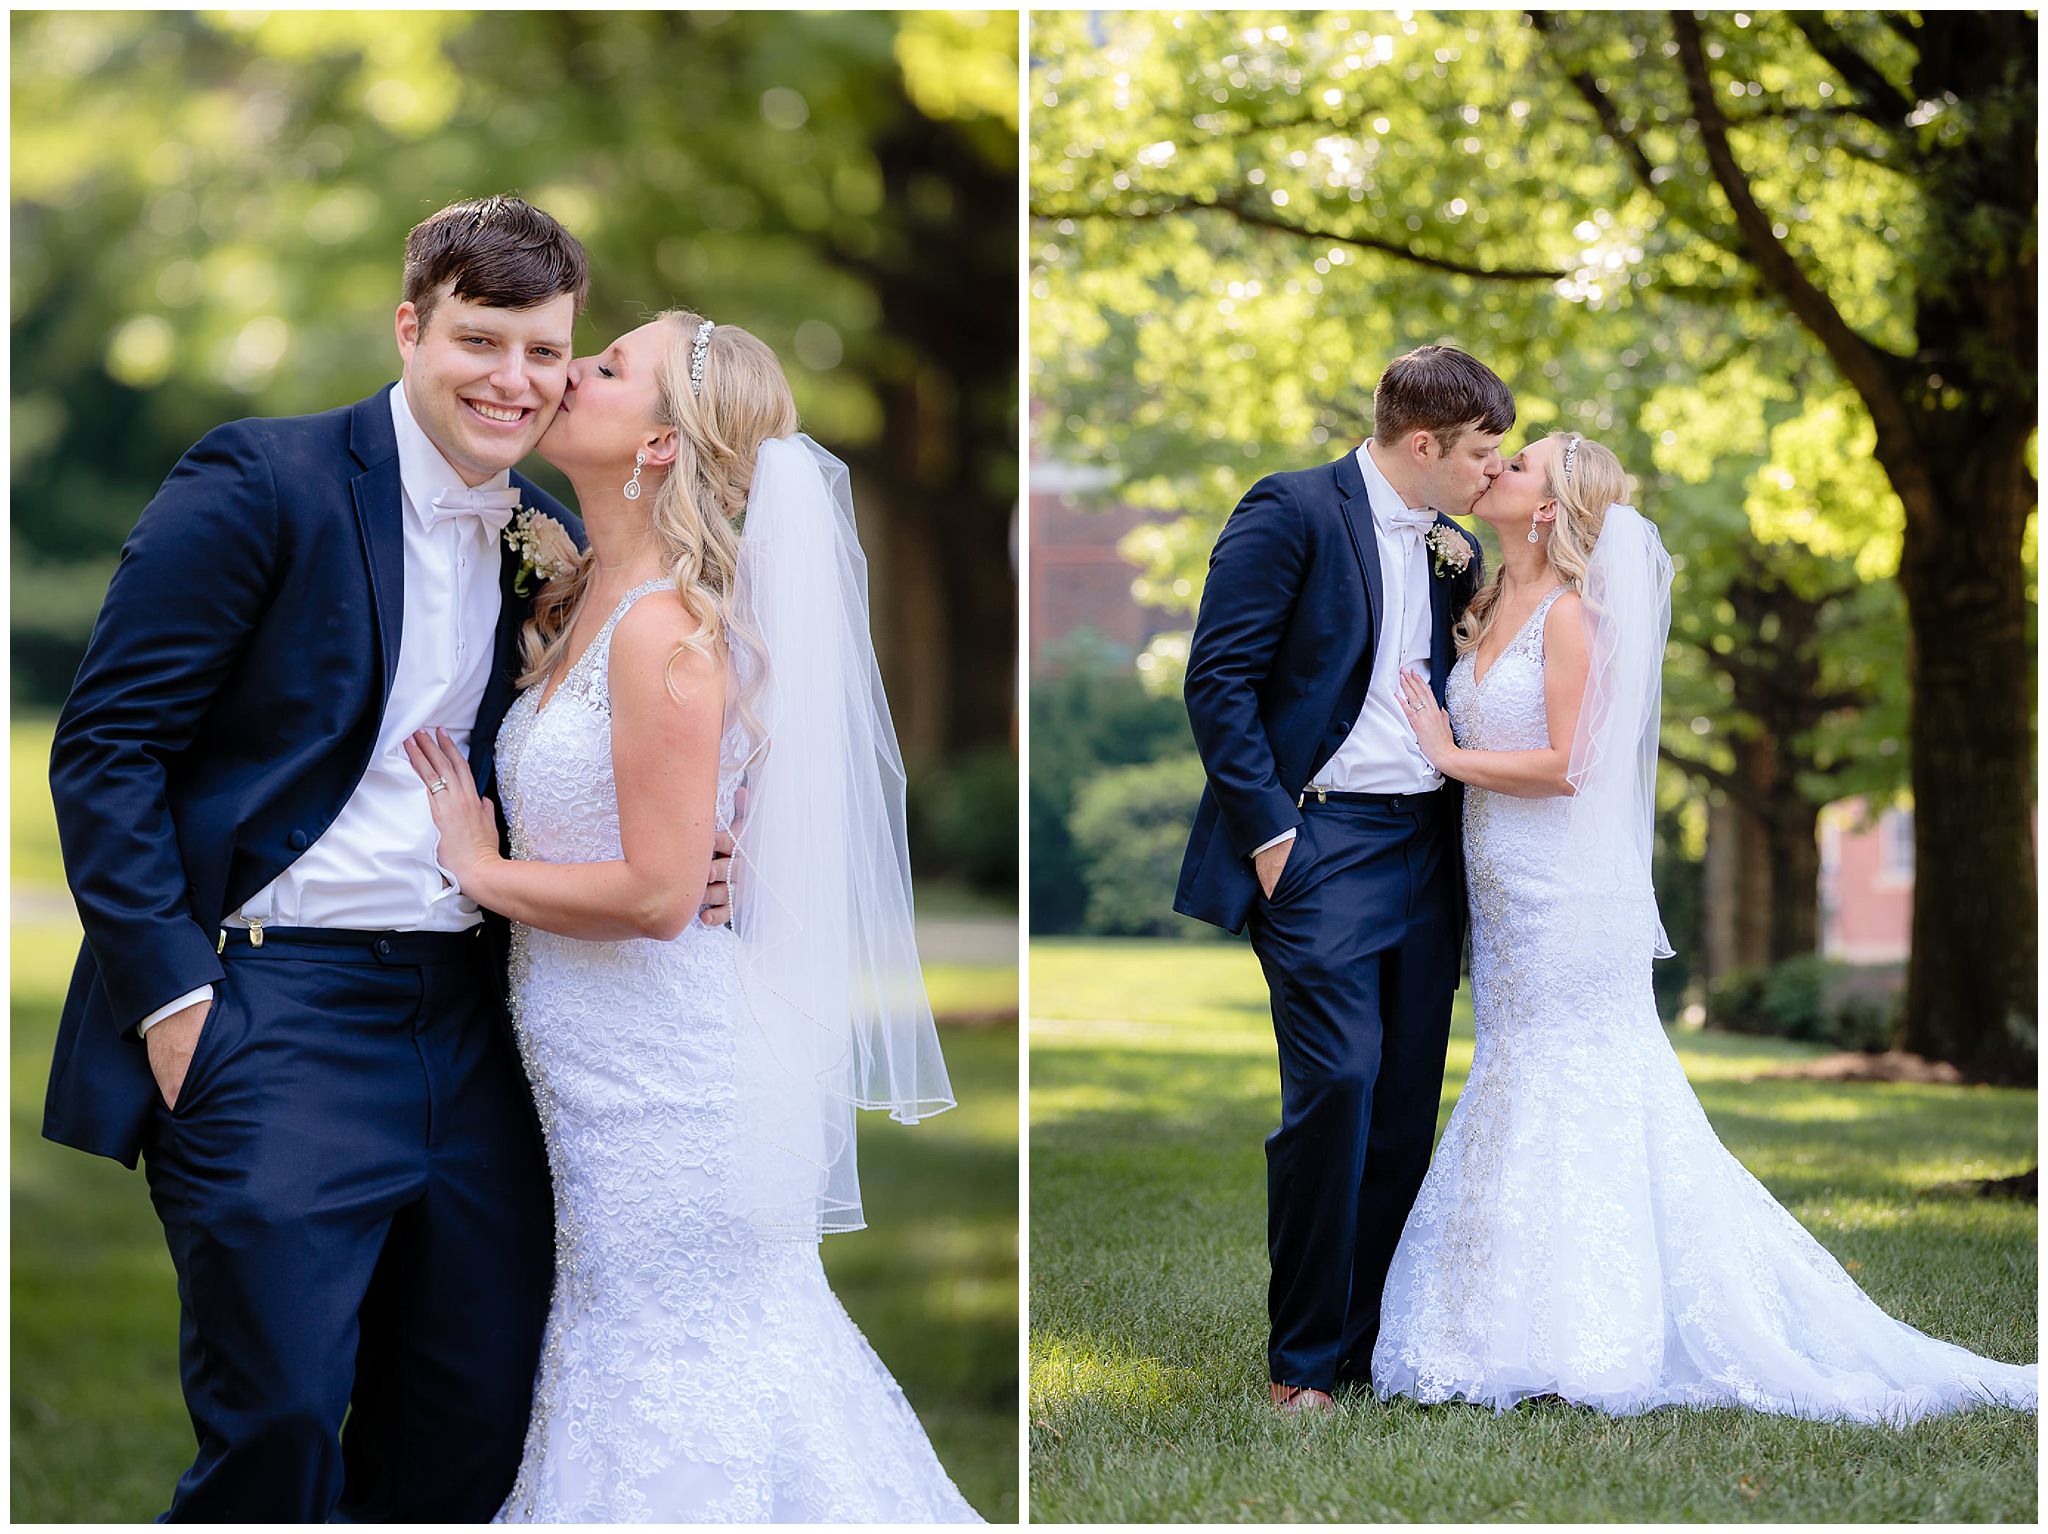 Newlywed portraits on the lawn at Duquesne University